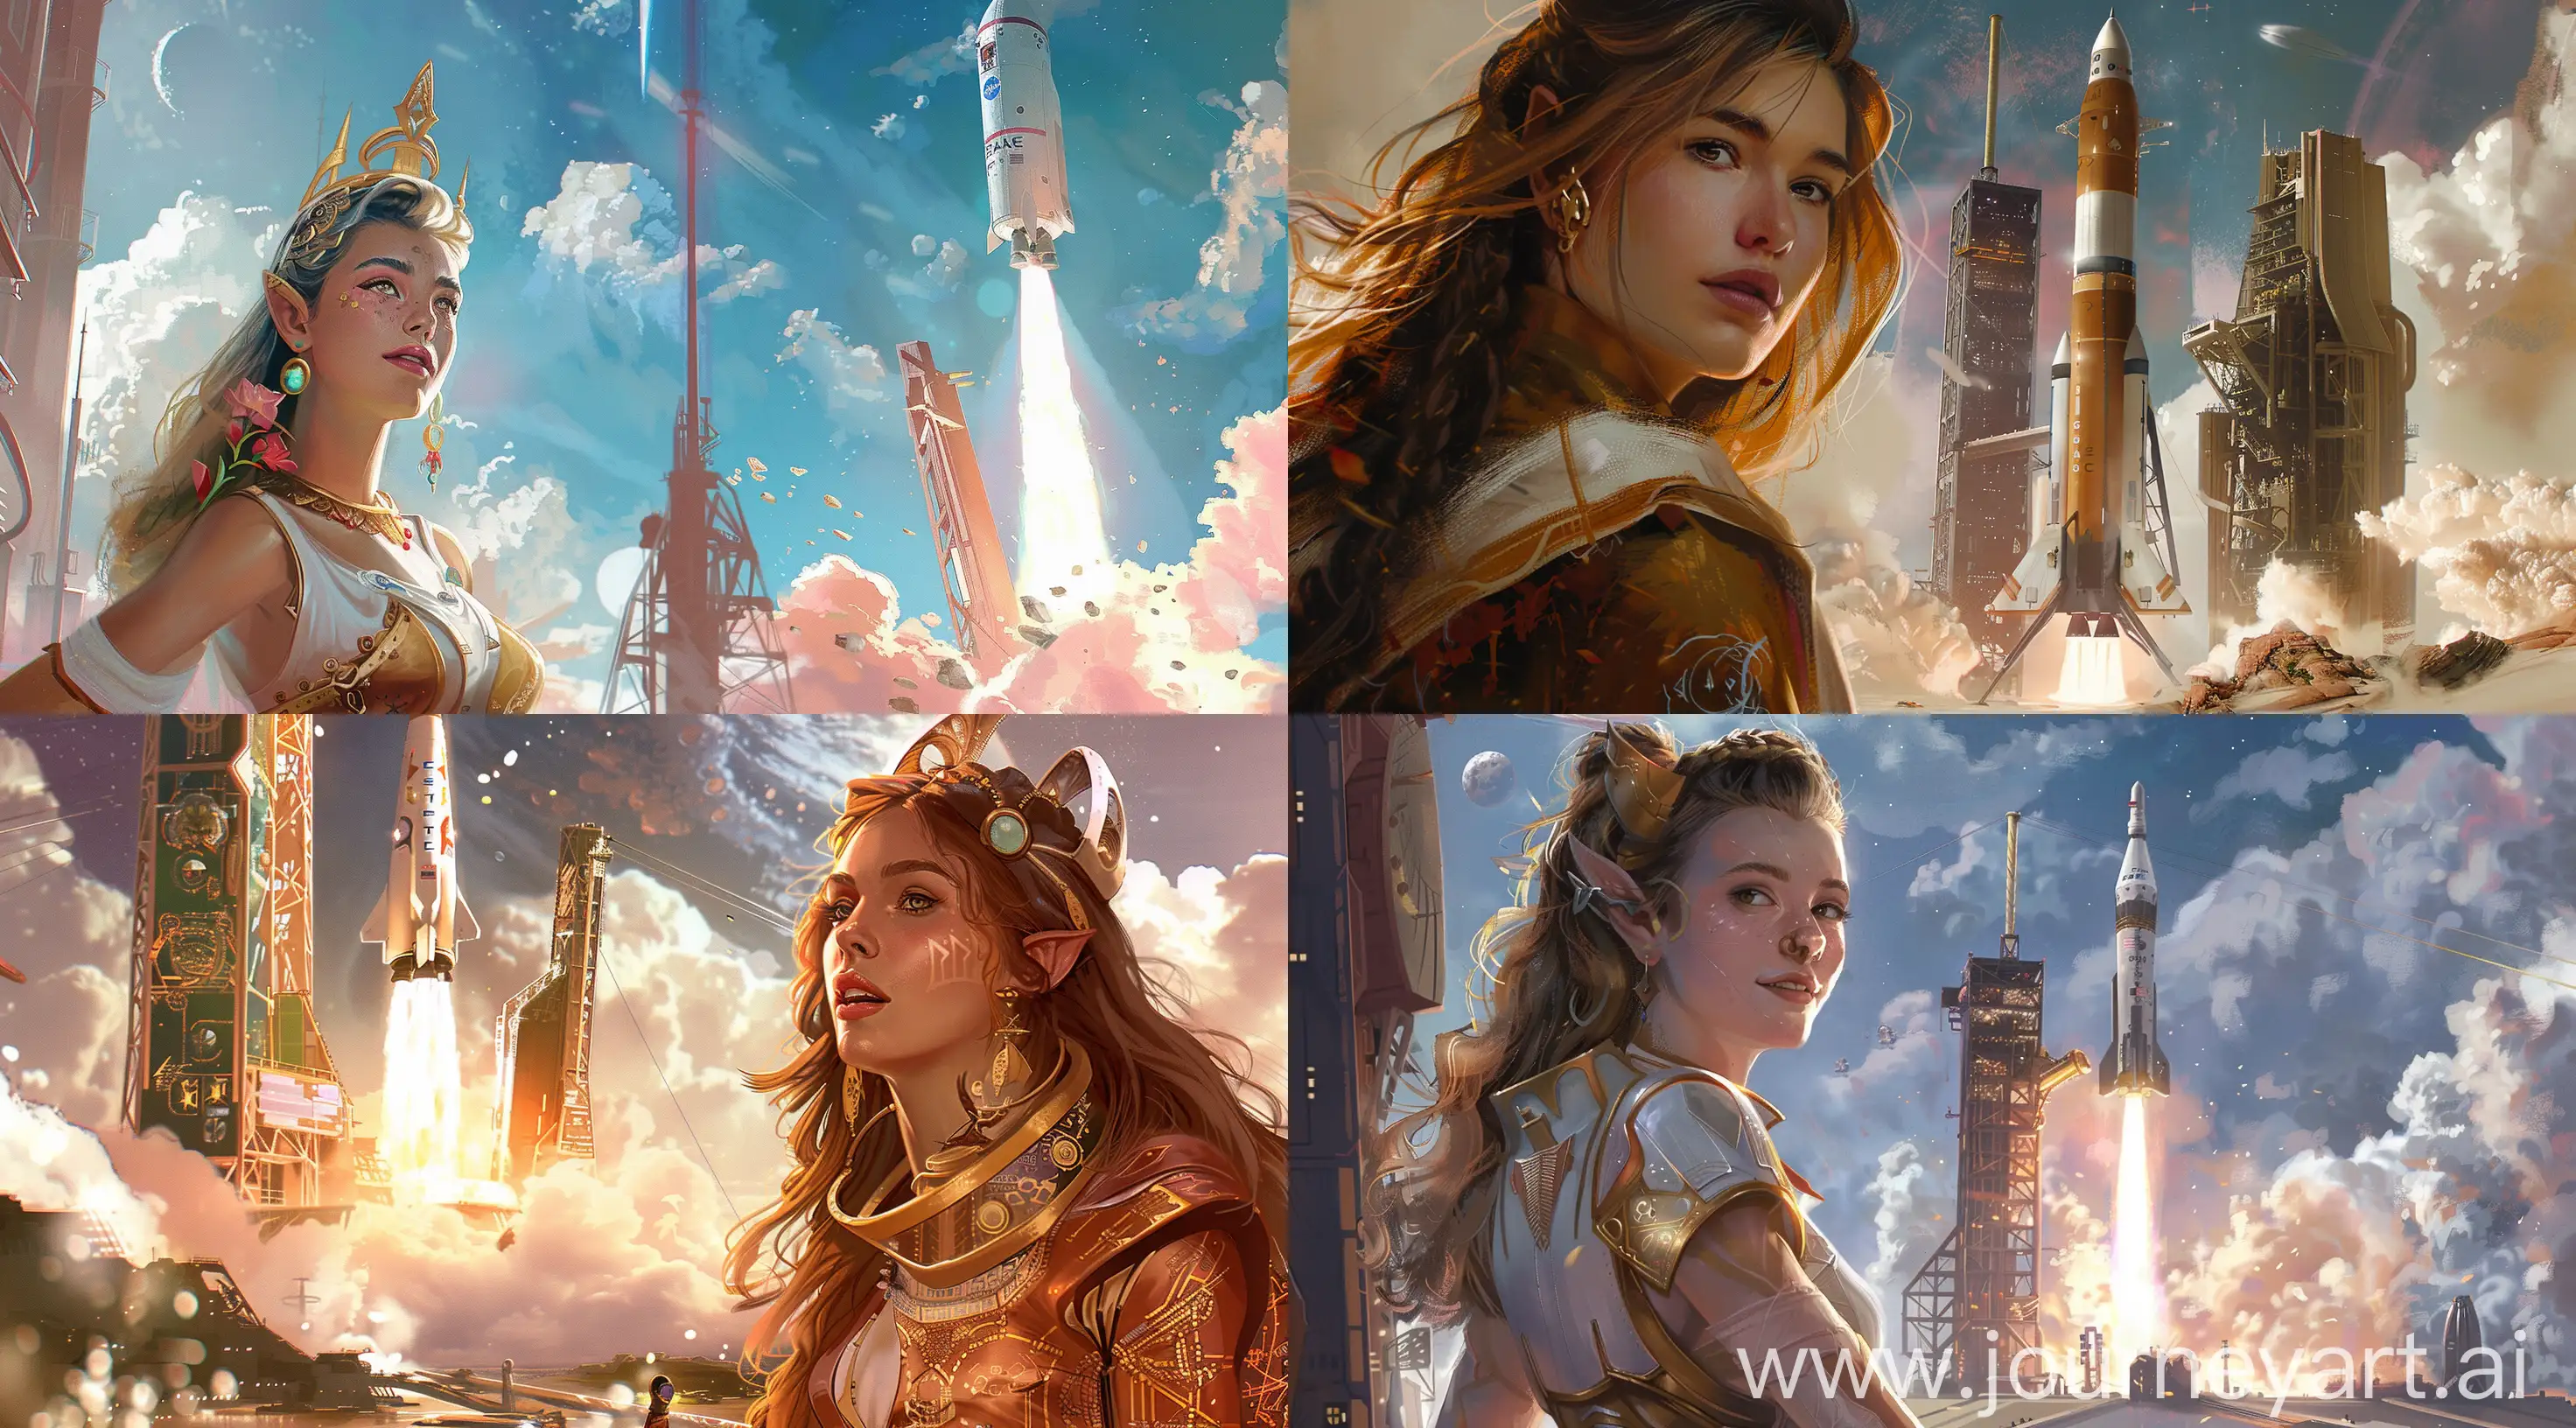 Create a visually exciting and challenging illustration in a realistic fantasy style of a beautiful young woman Space Nomad and Wanderer in front of a spaceship launch. The illustration should depict a scene reminiscent of a Tarot card, show grand scale, and incorporate influences from Nabis and Dungeons & Dragons and cosmoopera  --s 75 --ar 9:5 